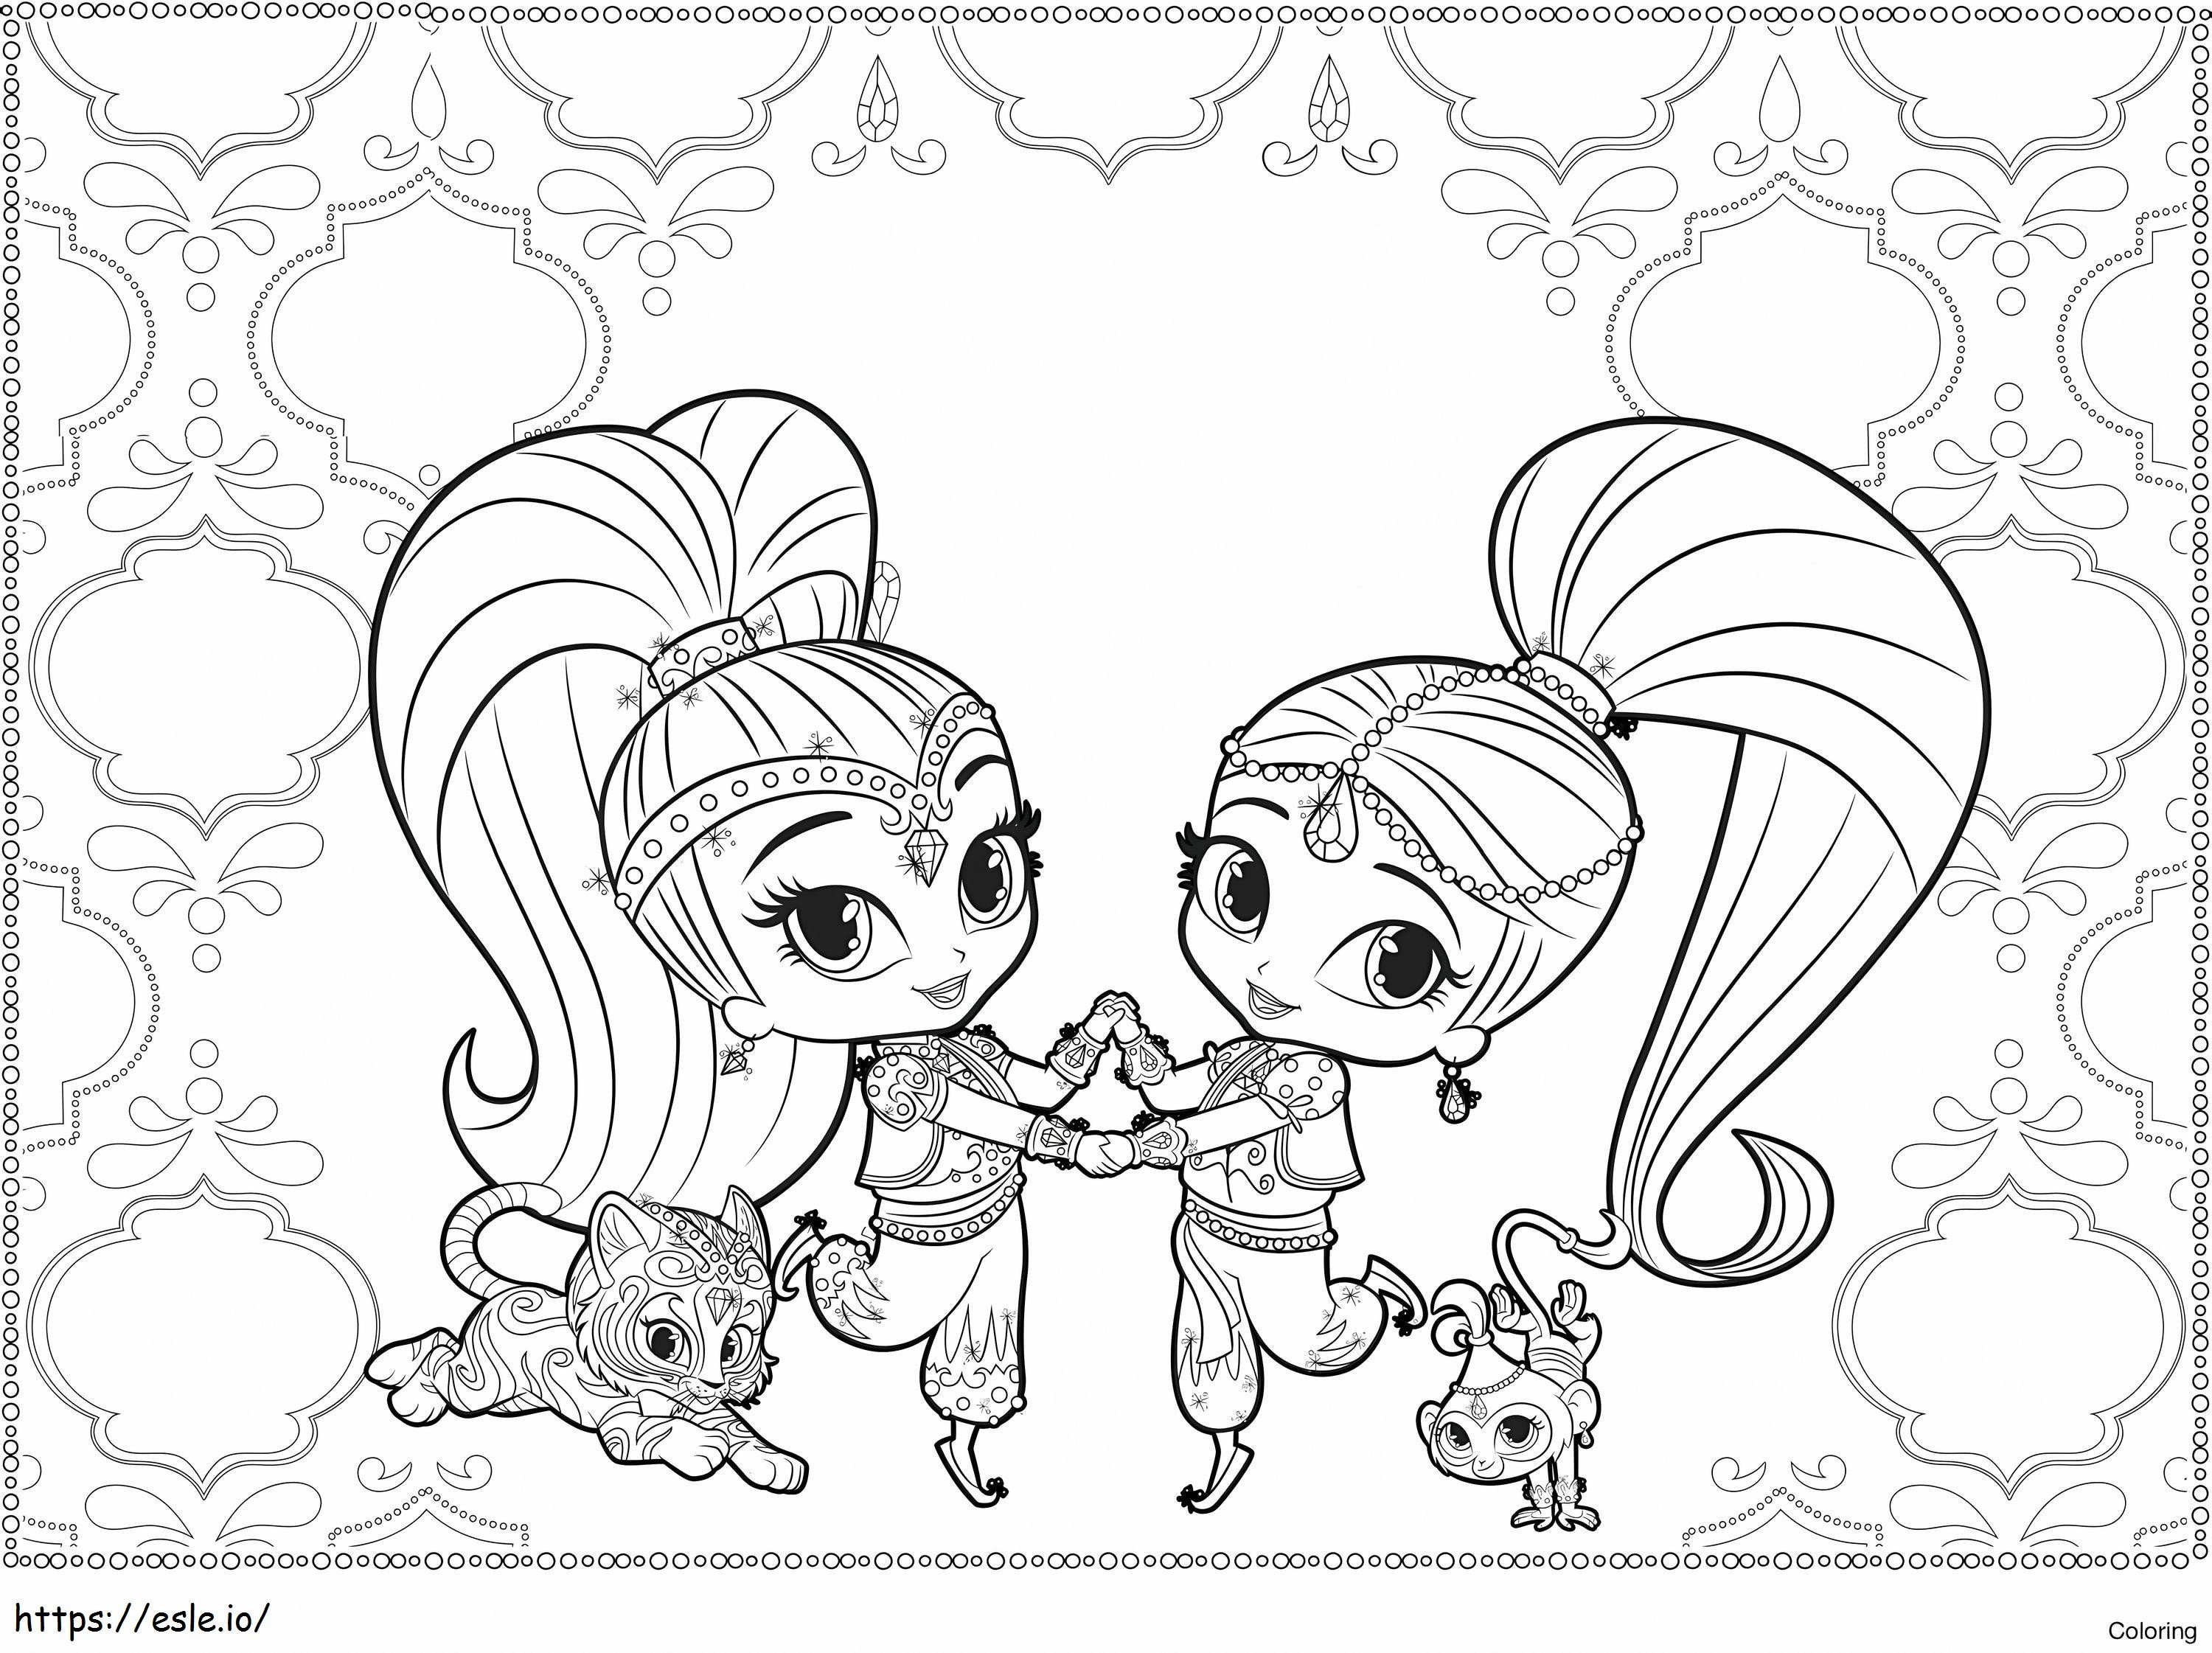 1571704955 Free Shimmer And Shine New Fresh Shimmer And Shine Of Free Shimmer And Shine coloring page